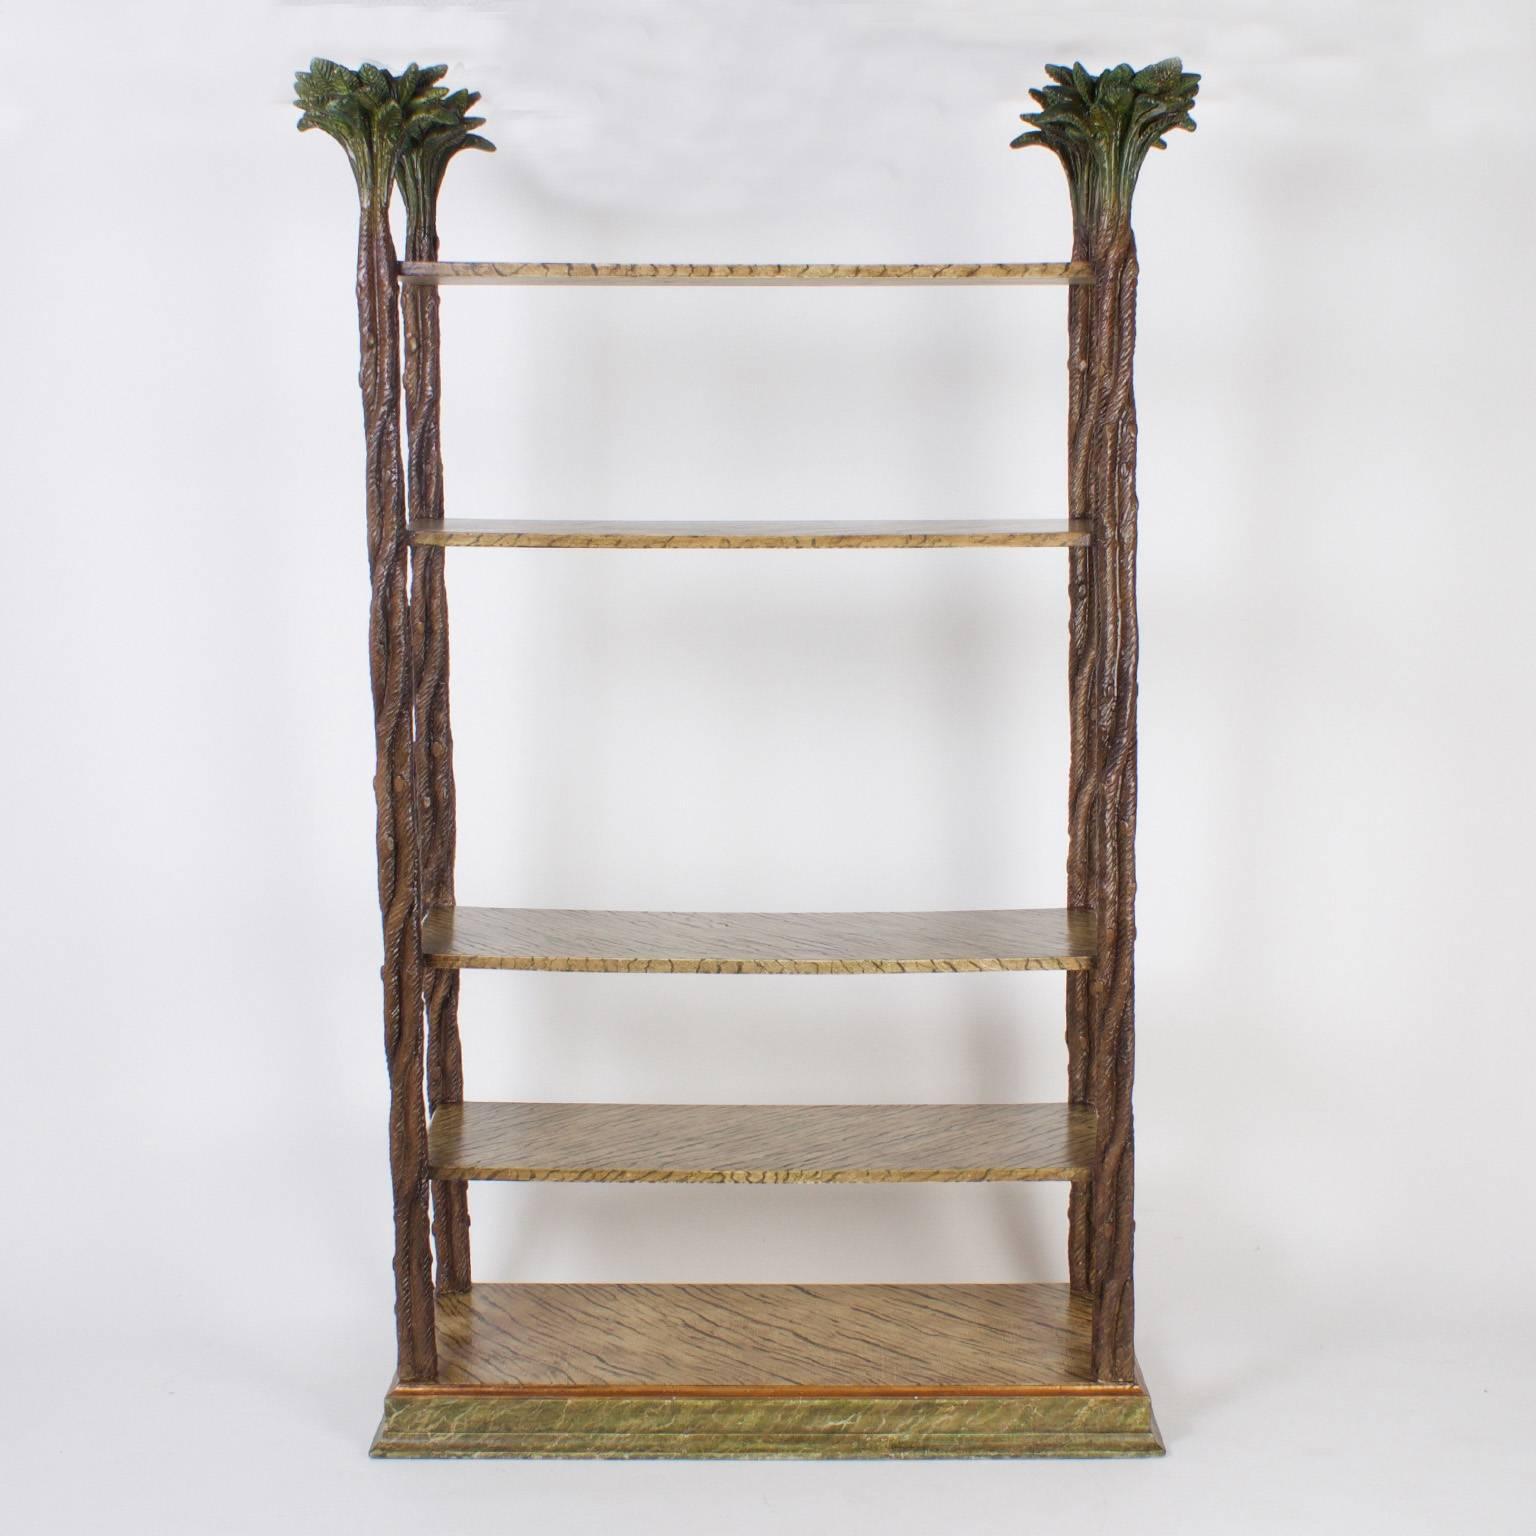 Whimsical, carved wood etagere or set of shelves with four stylized palm leaf finials supported by carved vine posts. Five faux finished shelves offer plenty of storage or display space. Finished on all four sides for maximum opportunities.